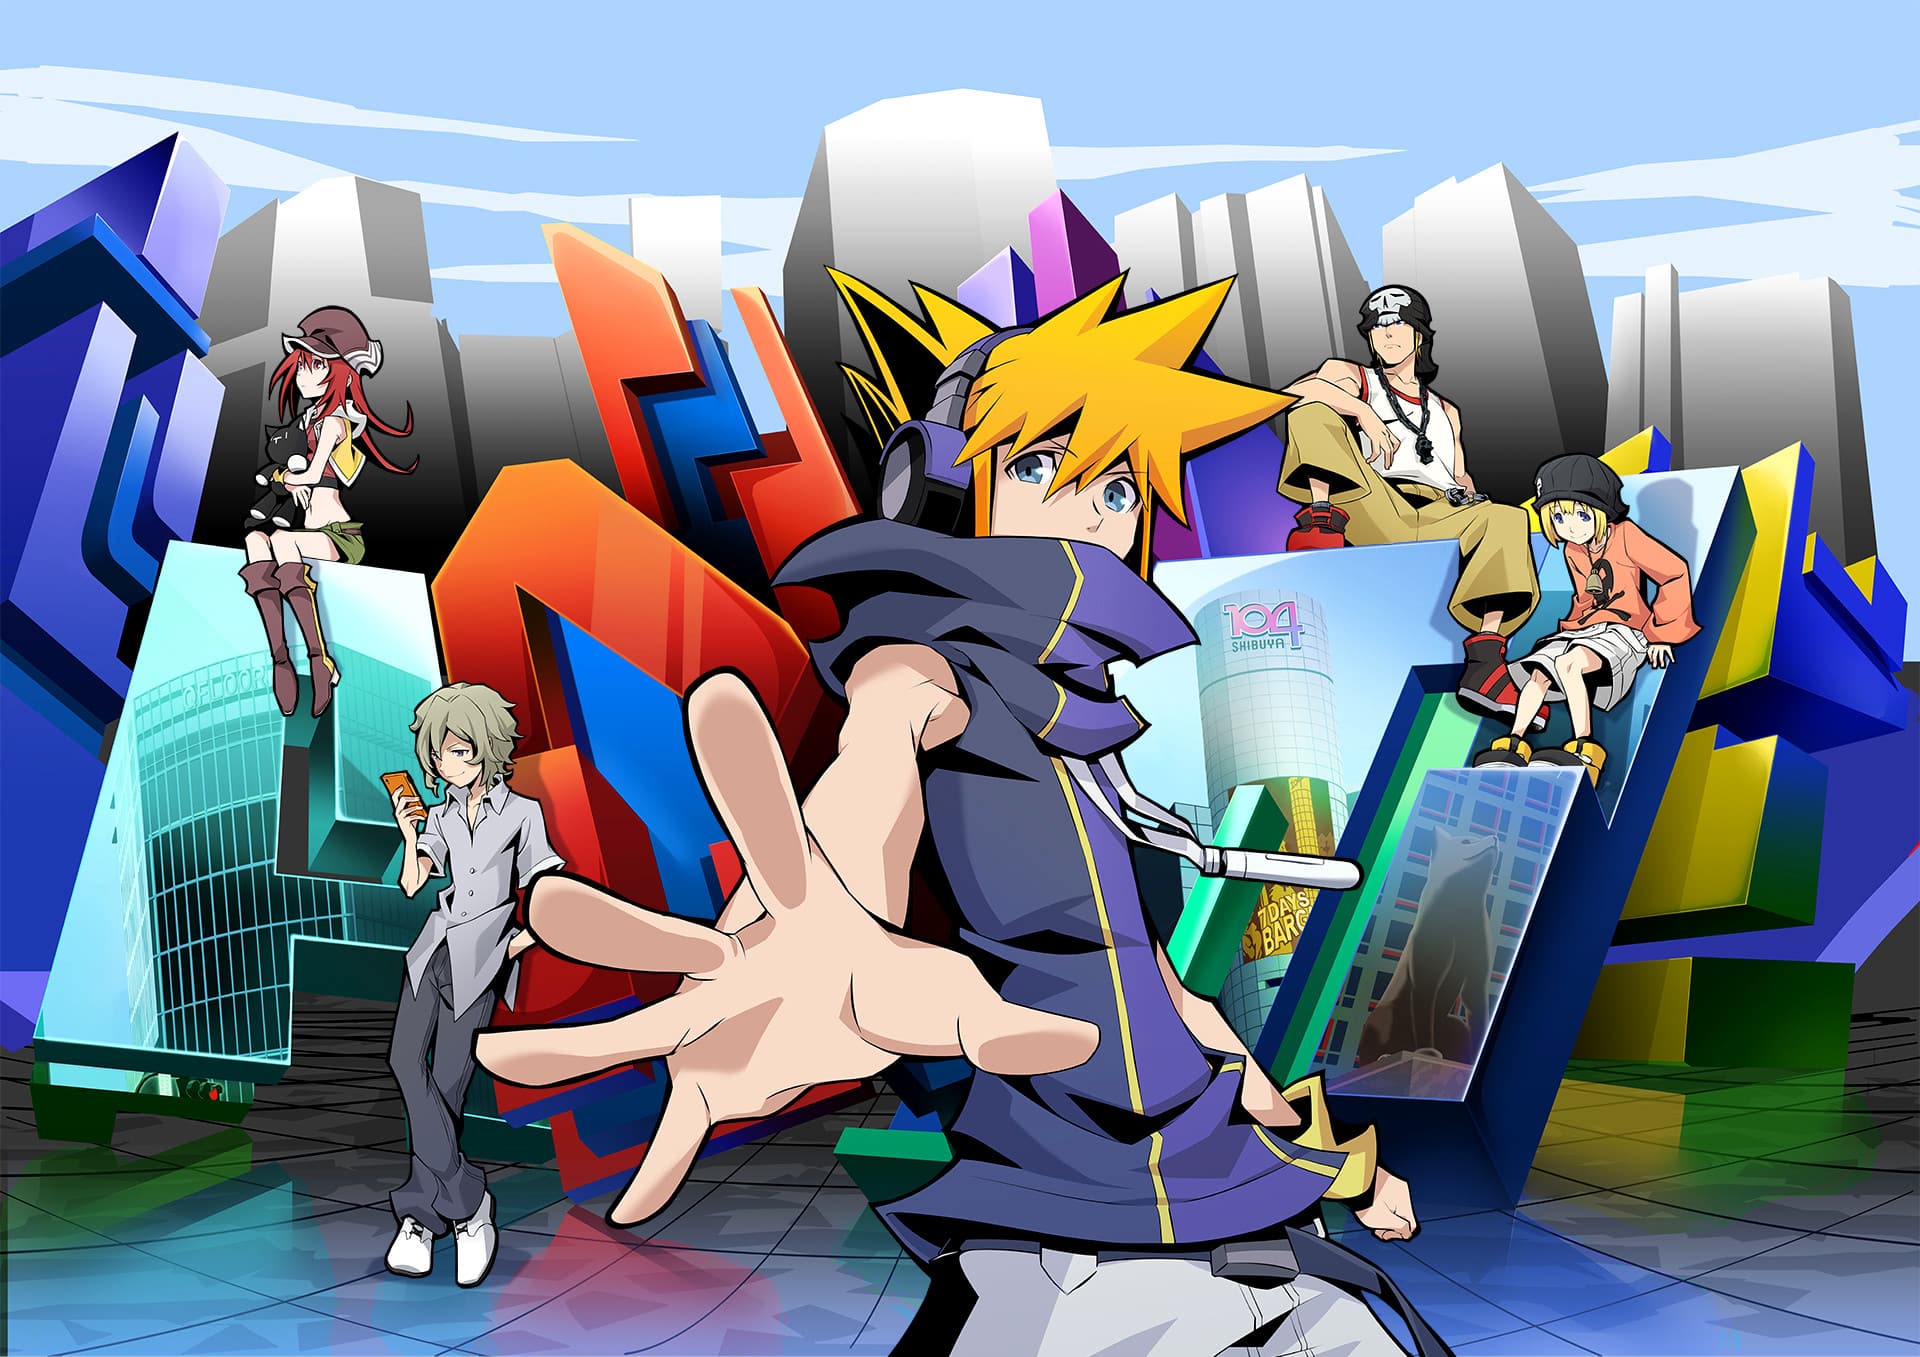 Trailer vidéo pour l'anime The World Ends With You